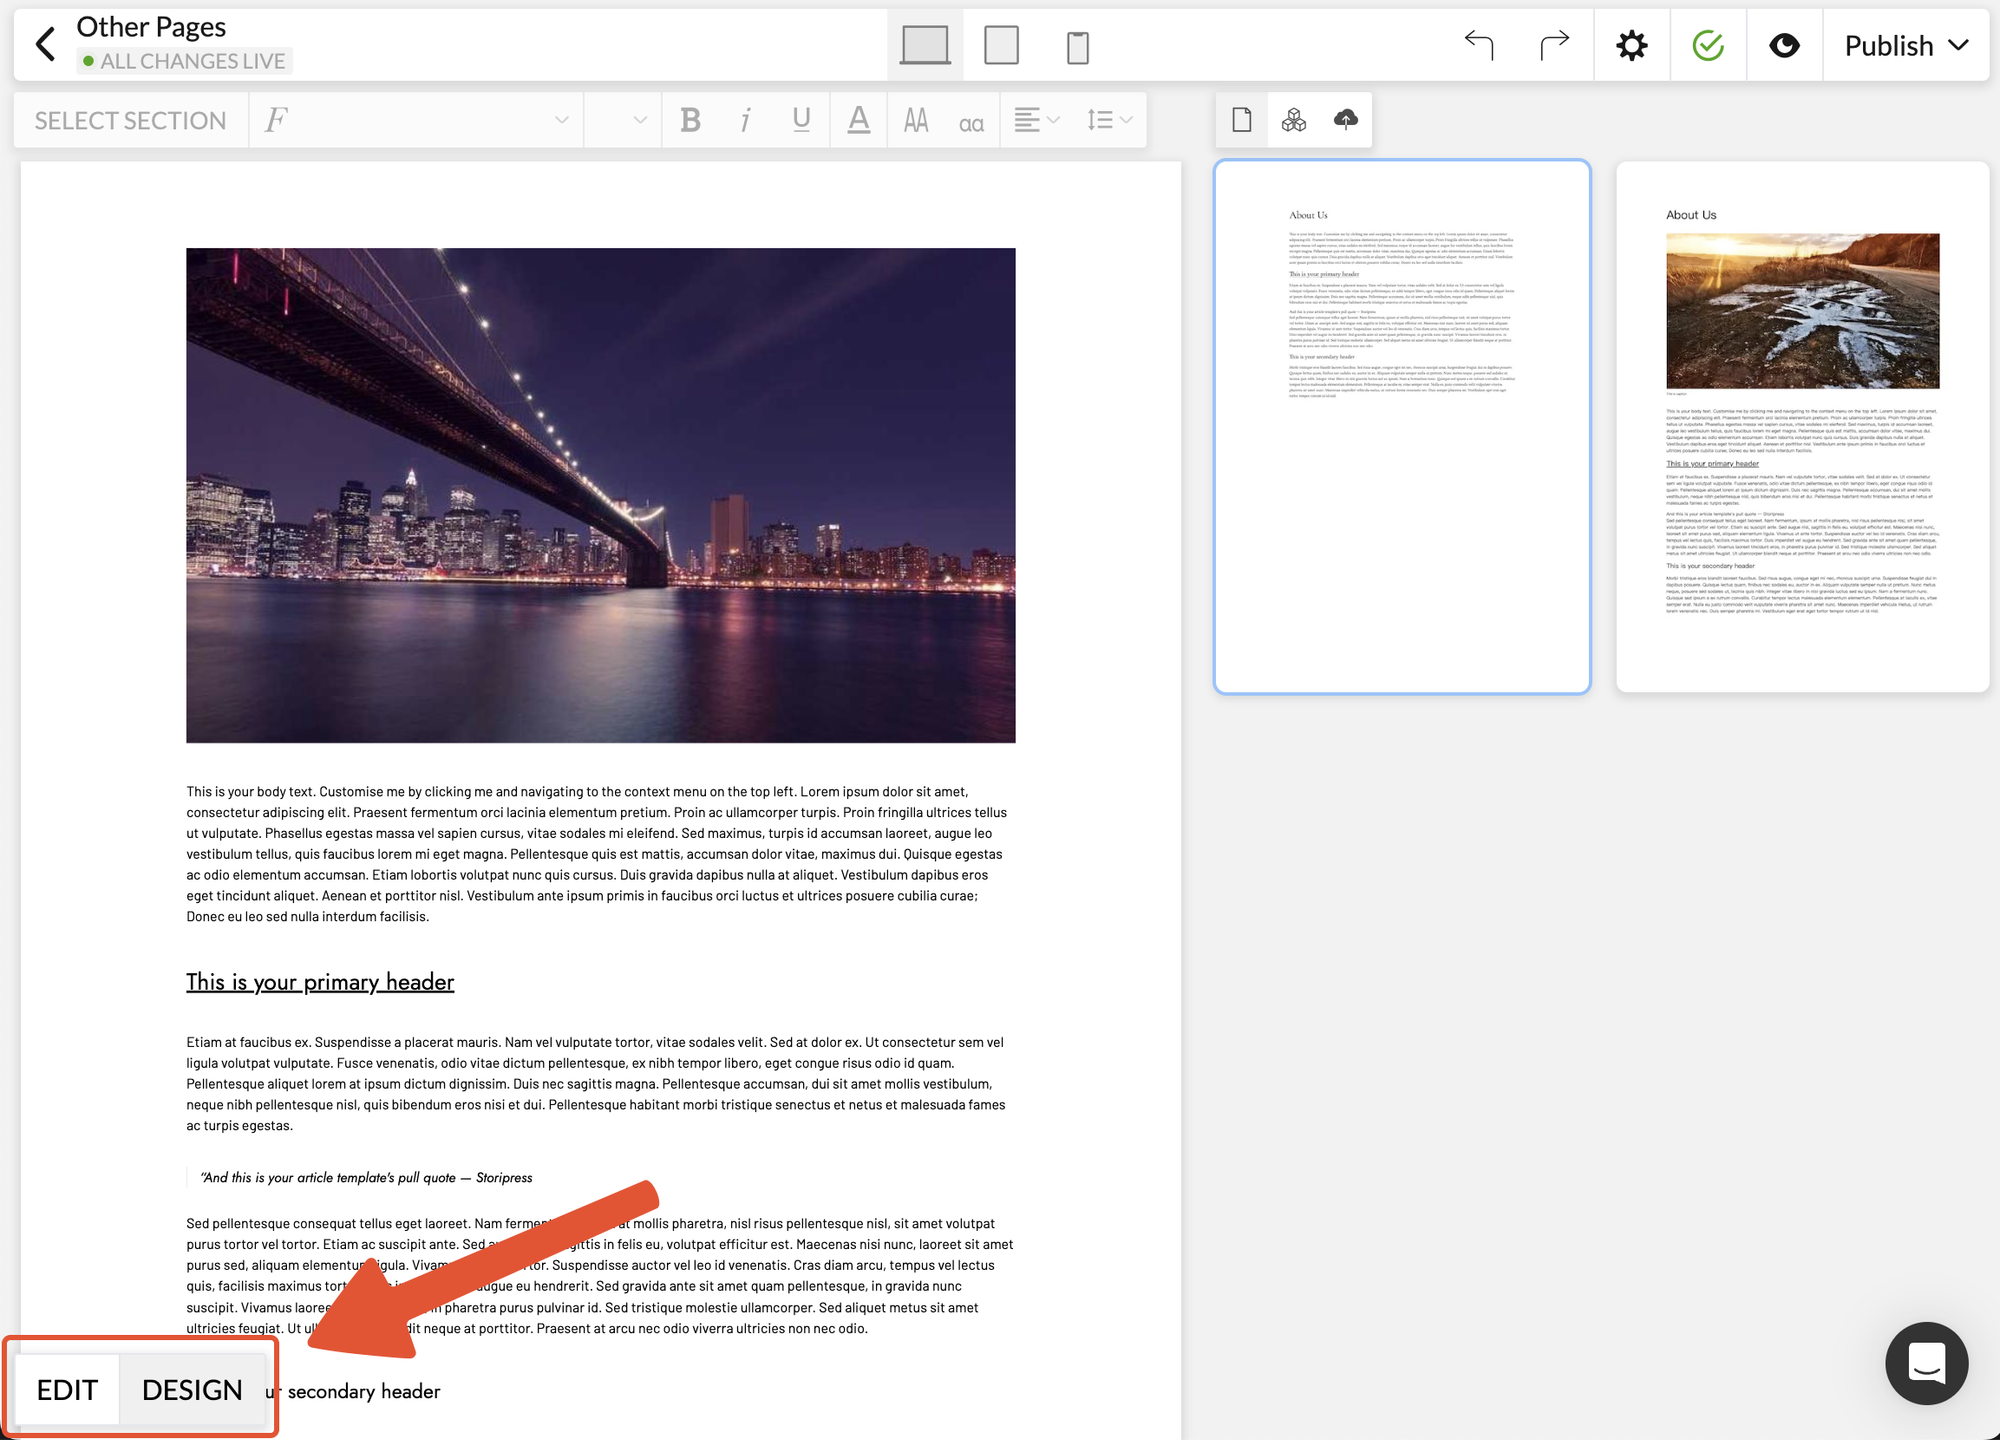 2. Edit the layout of your page using the Design toggle and add your content to your page using the Edit toggle